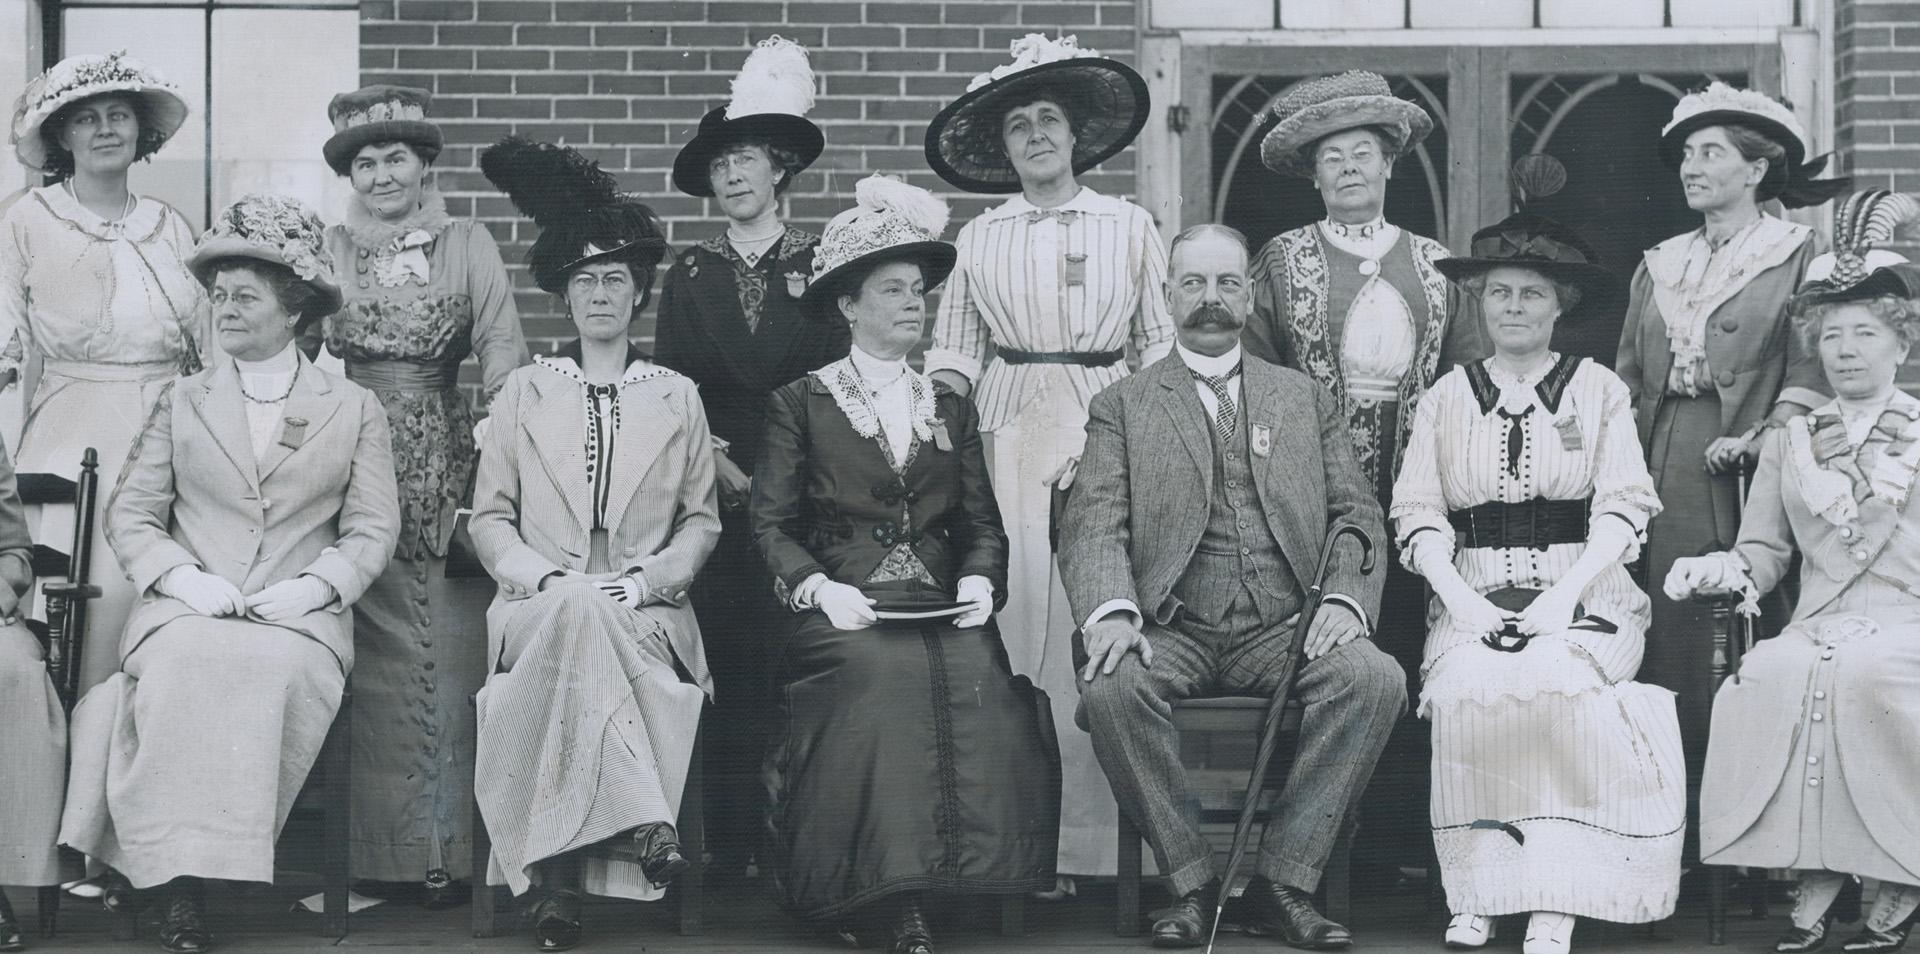 Group of CNE visitors, photographed around 1910, is seen here